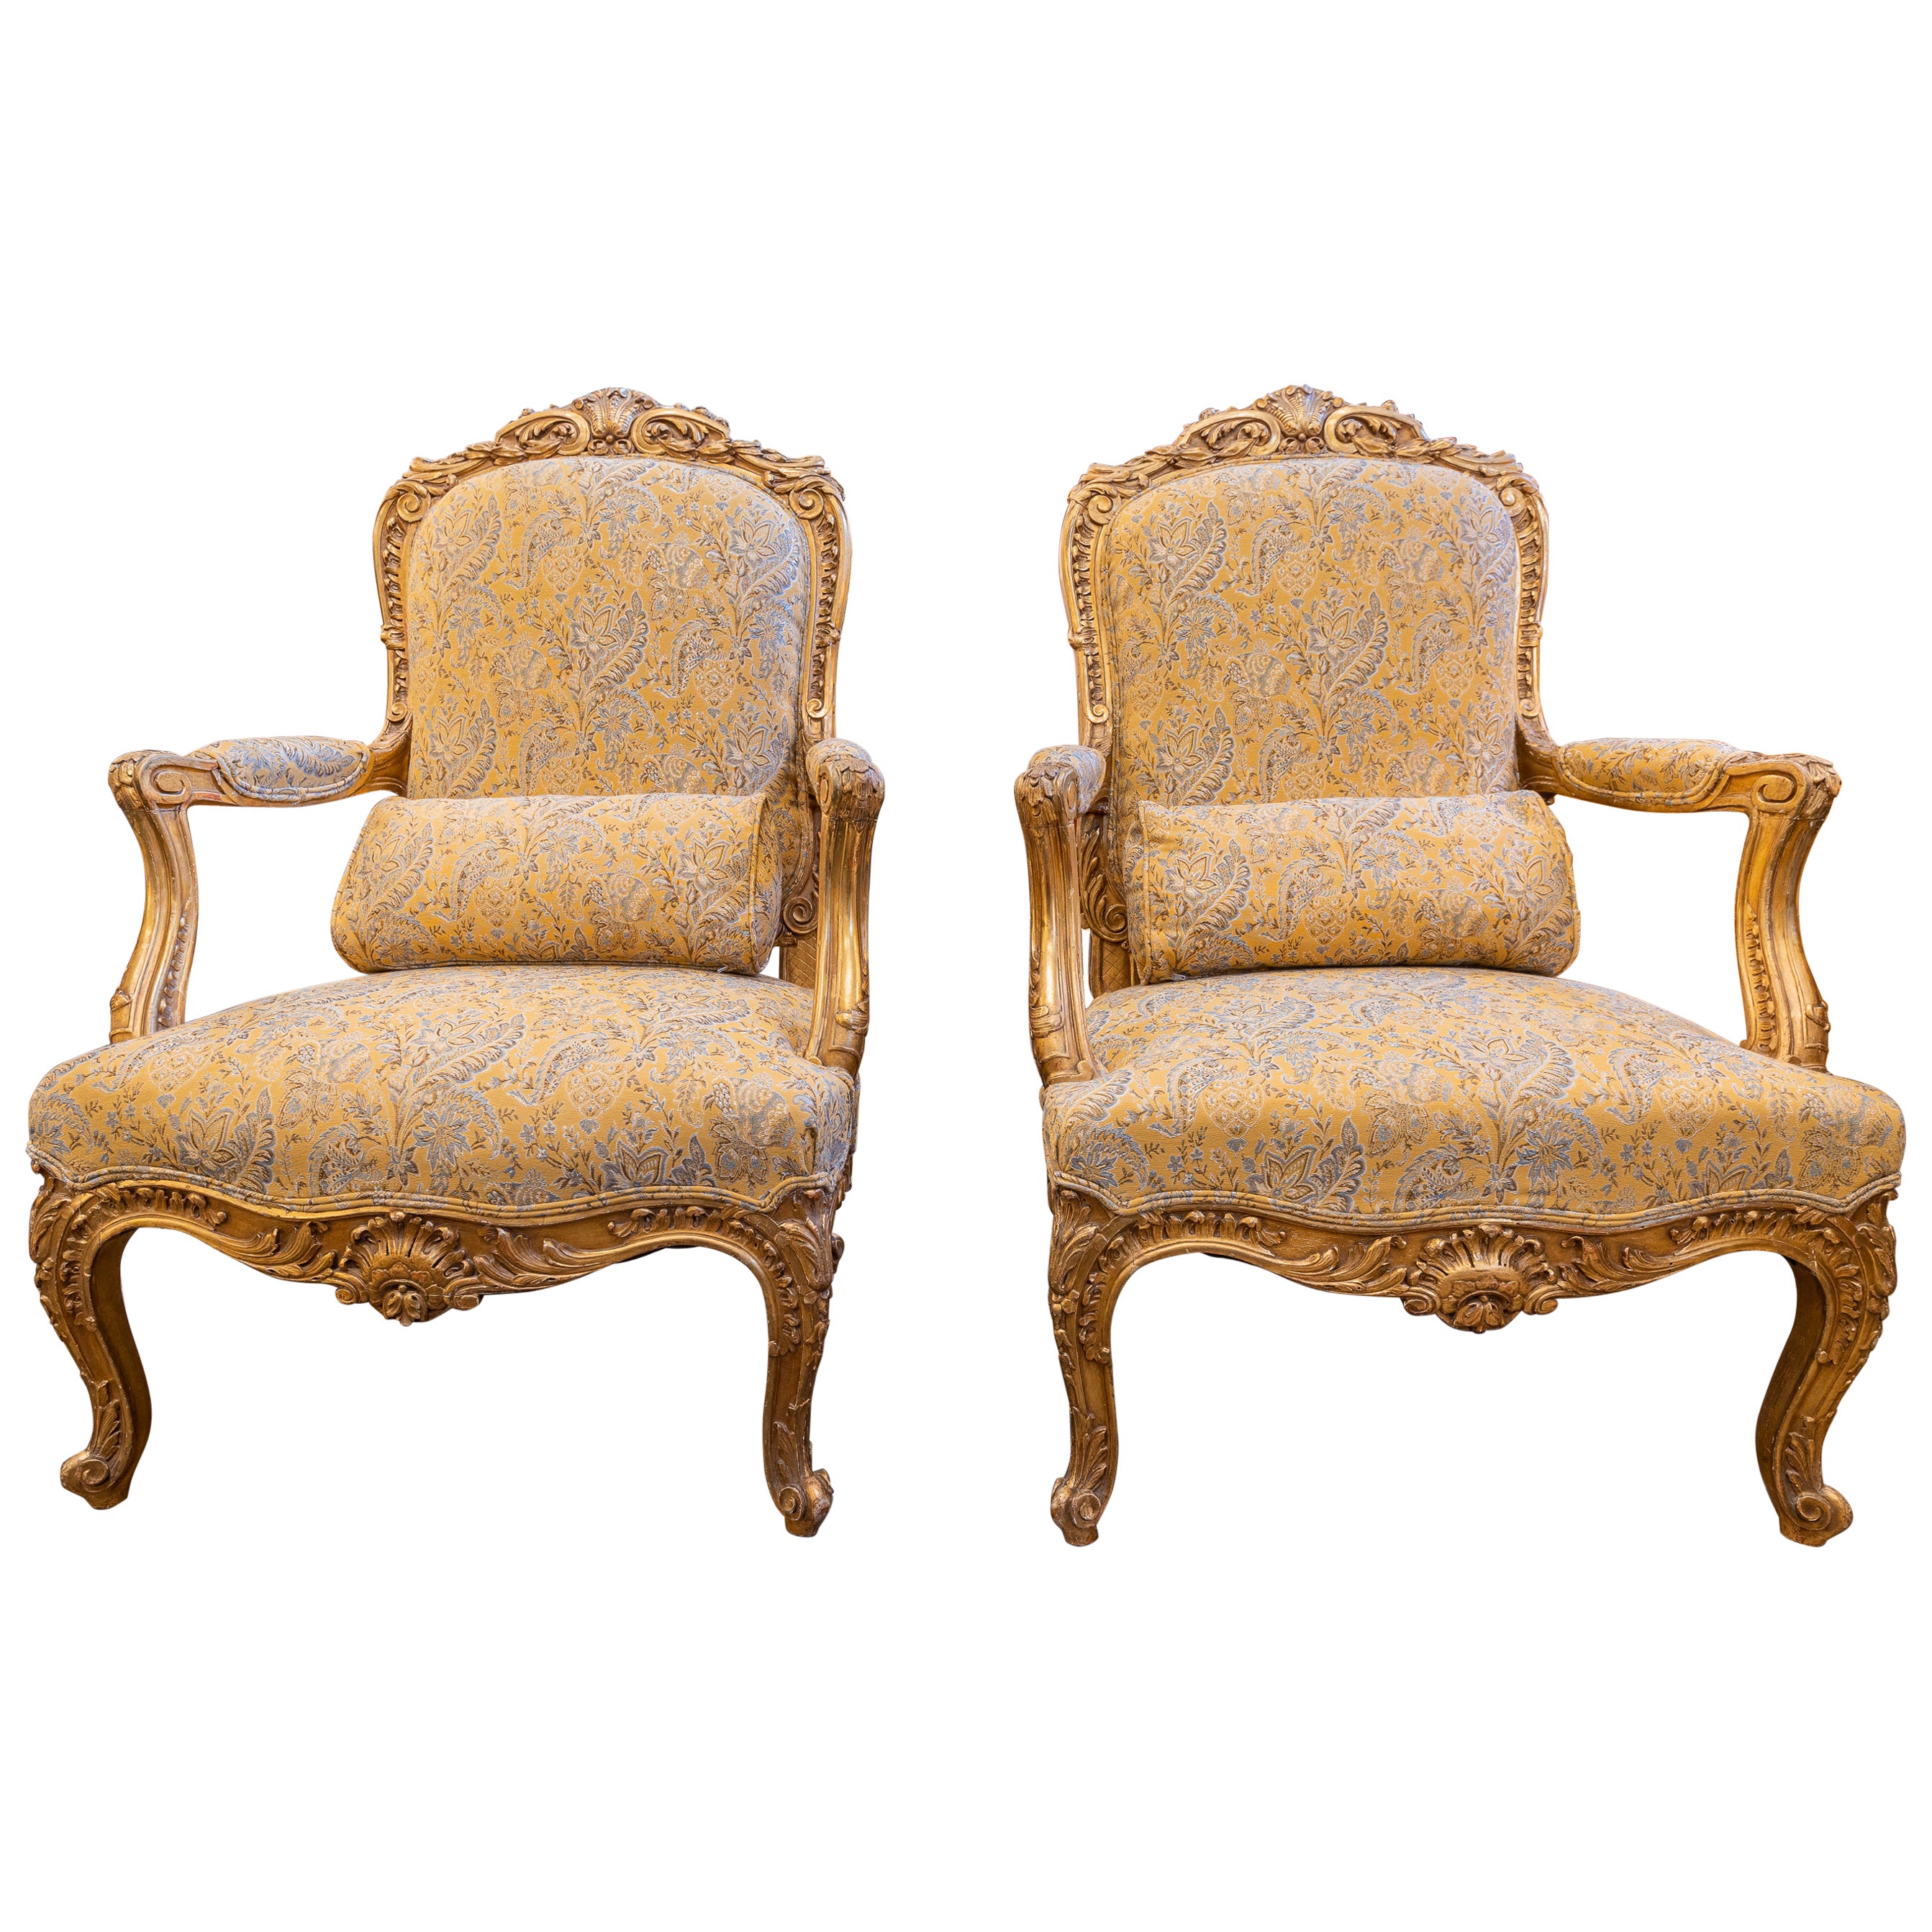 A fine large pair of 19th c gilt carved Louis XV fauteiuls